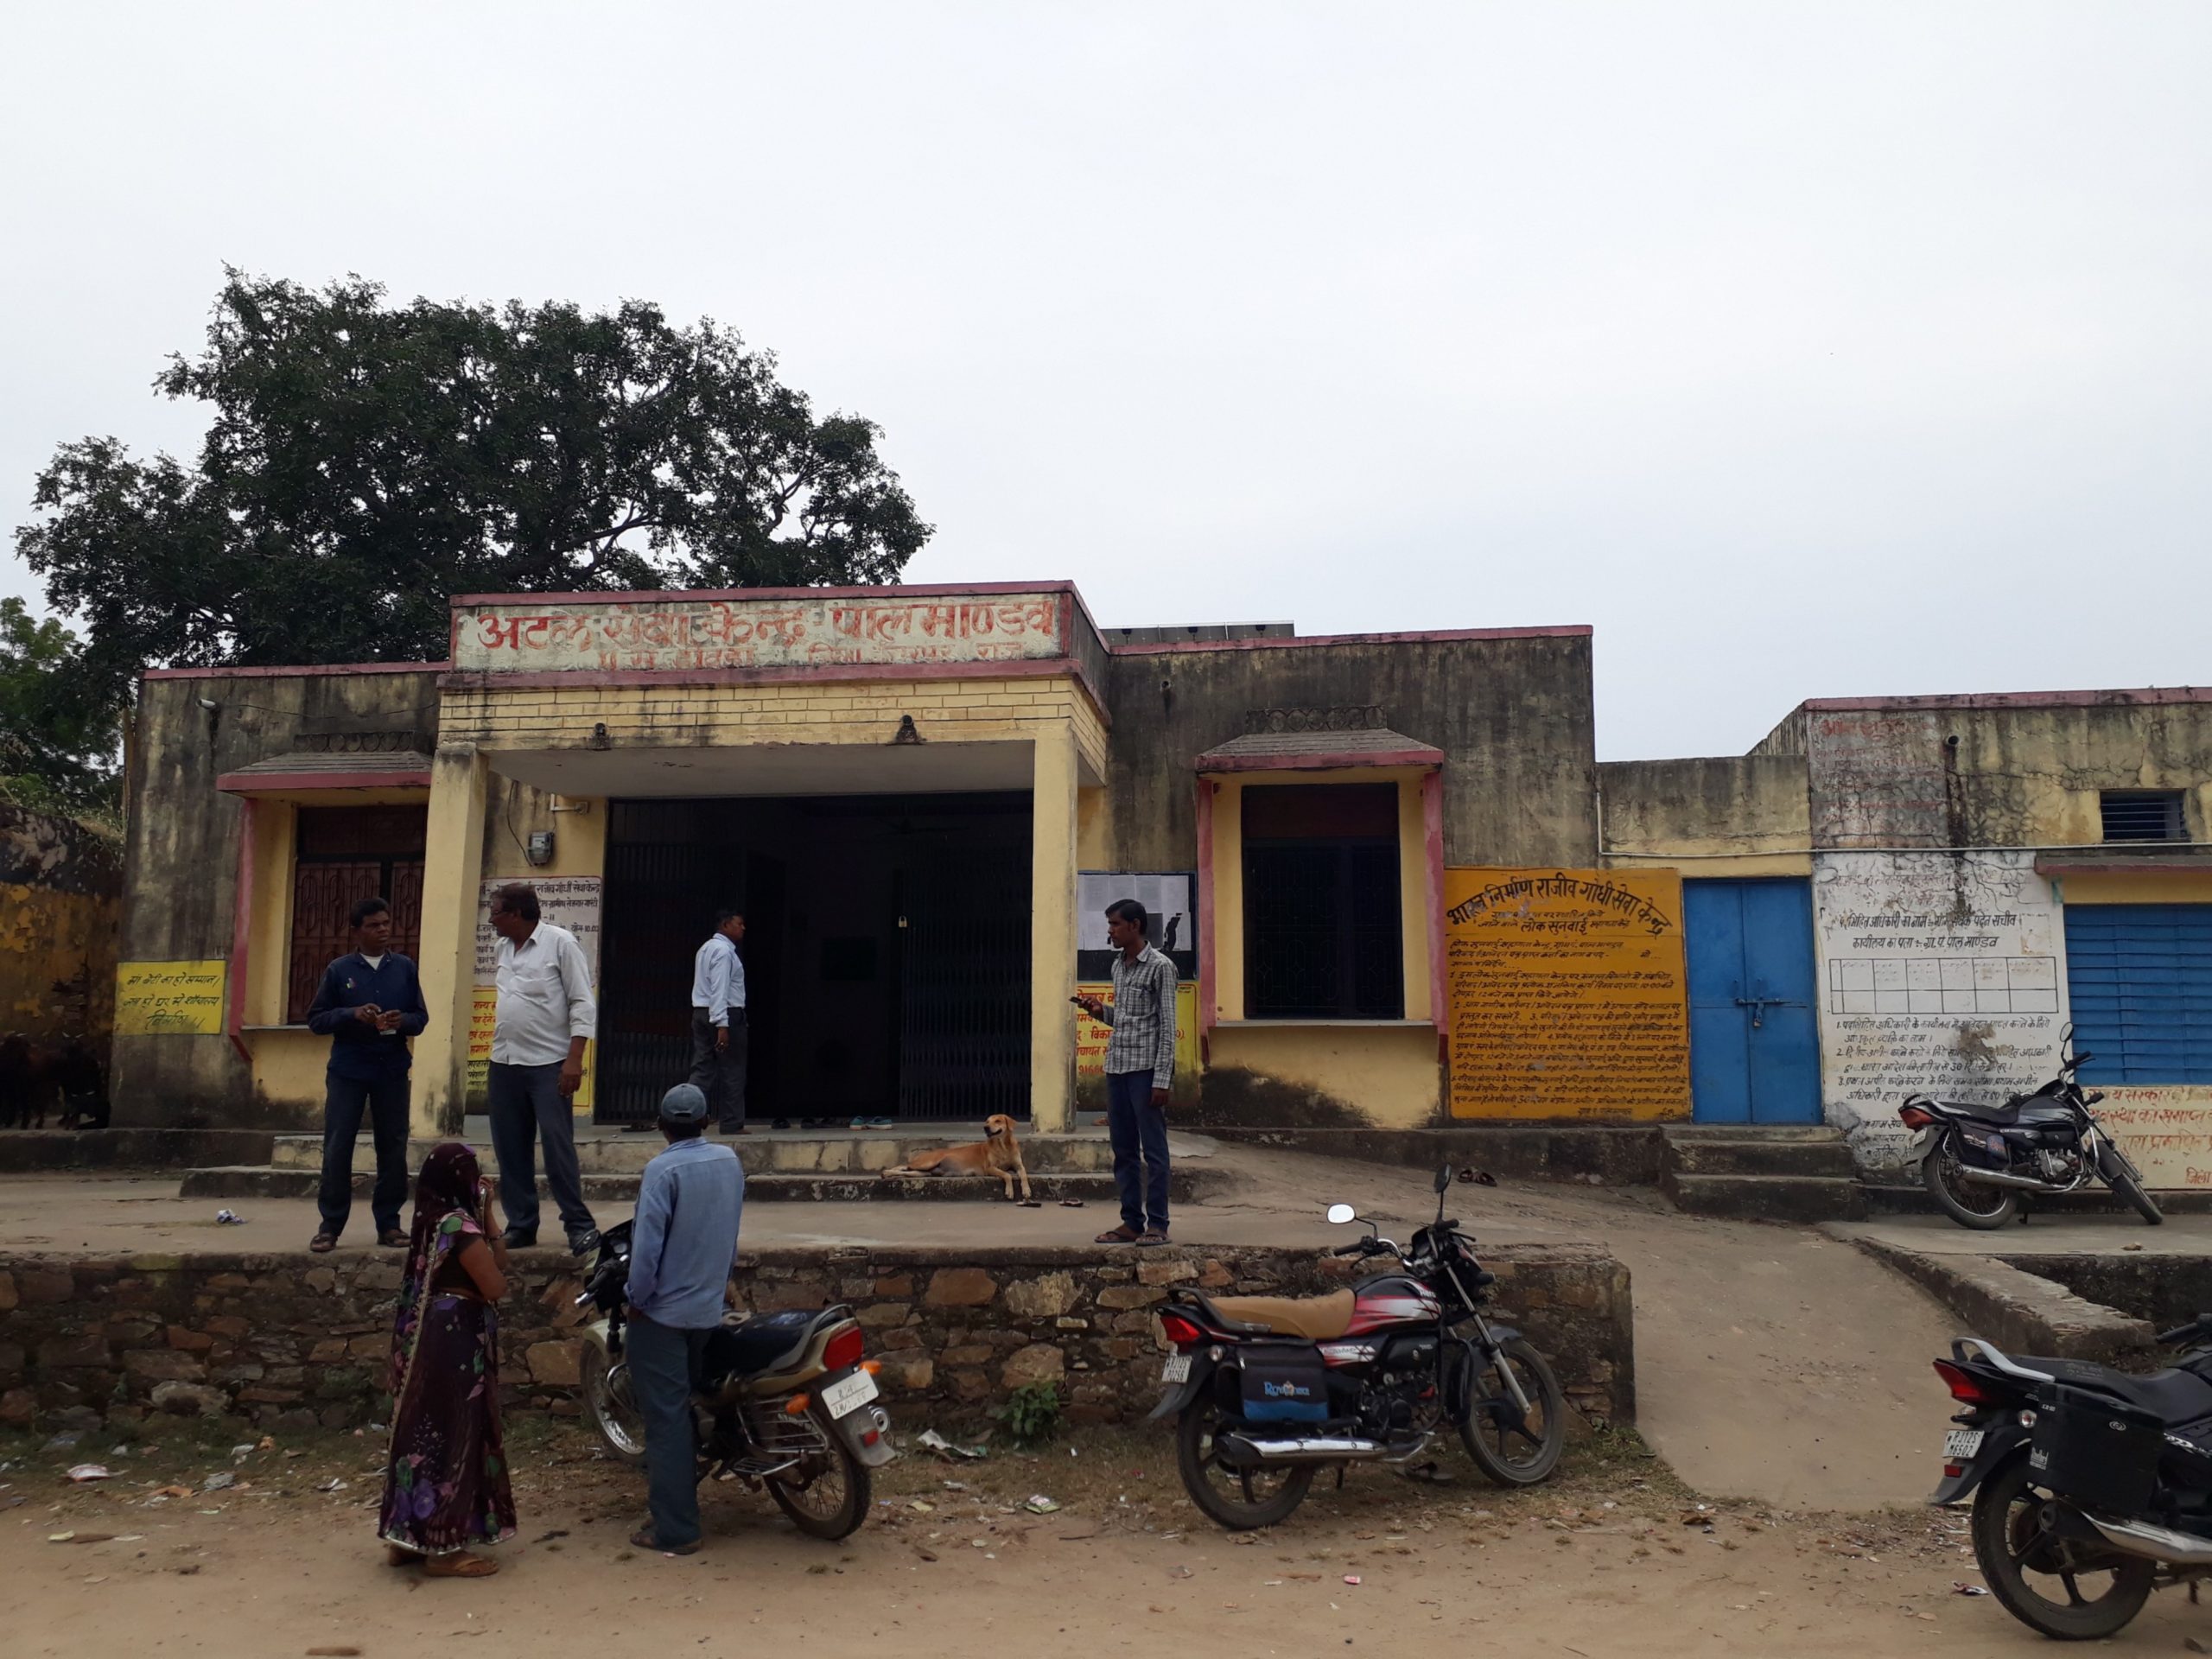 People standing in front of a building-systems of local self-government in India